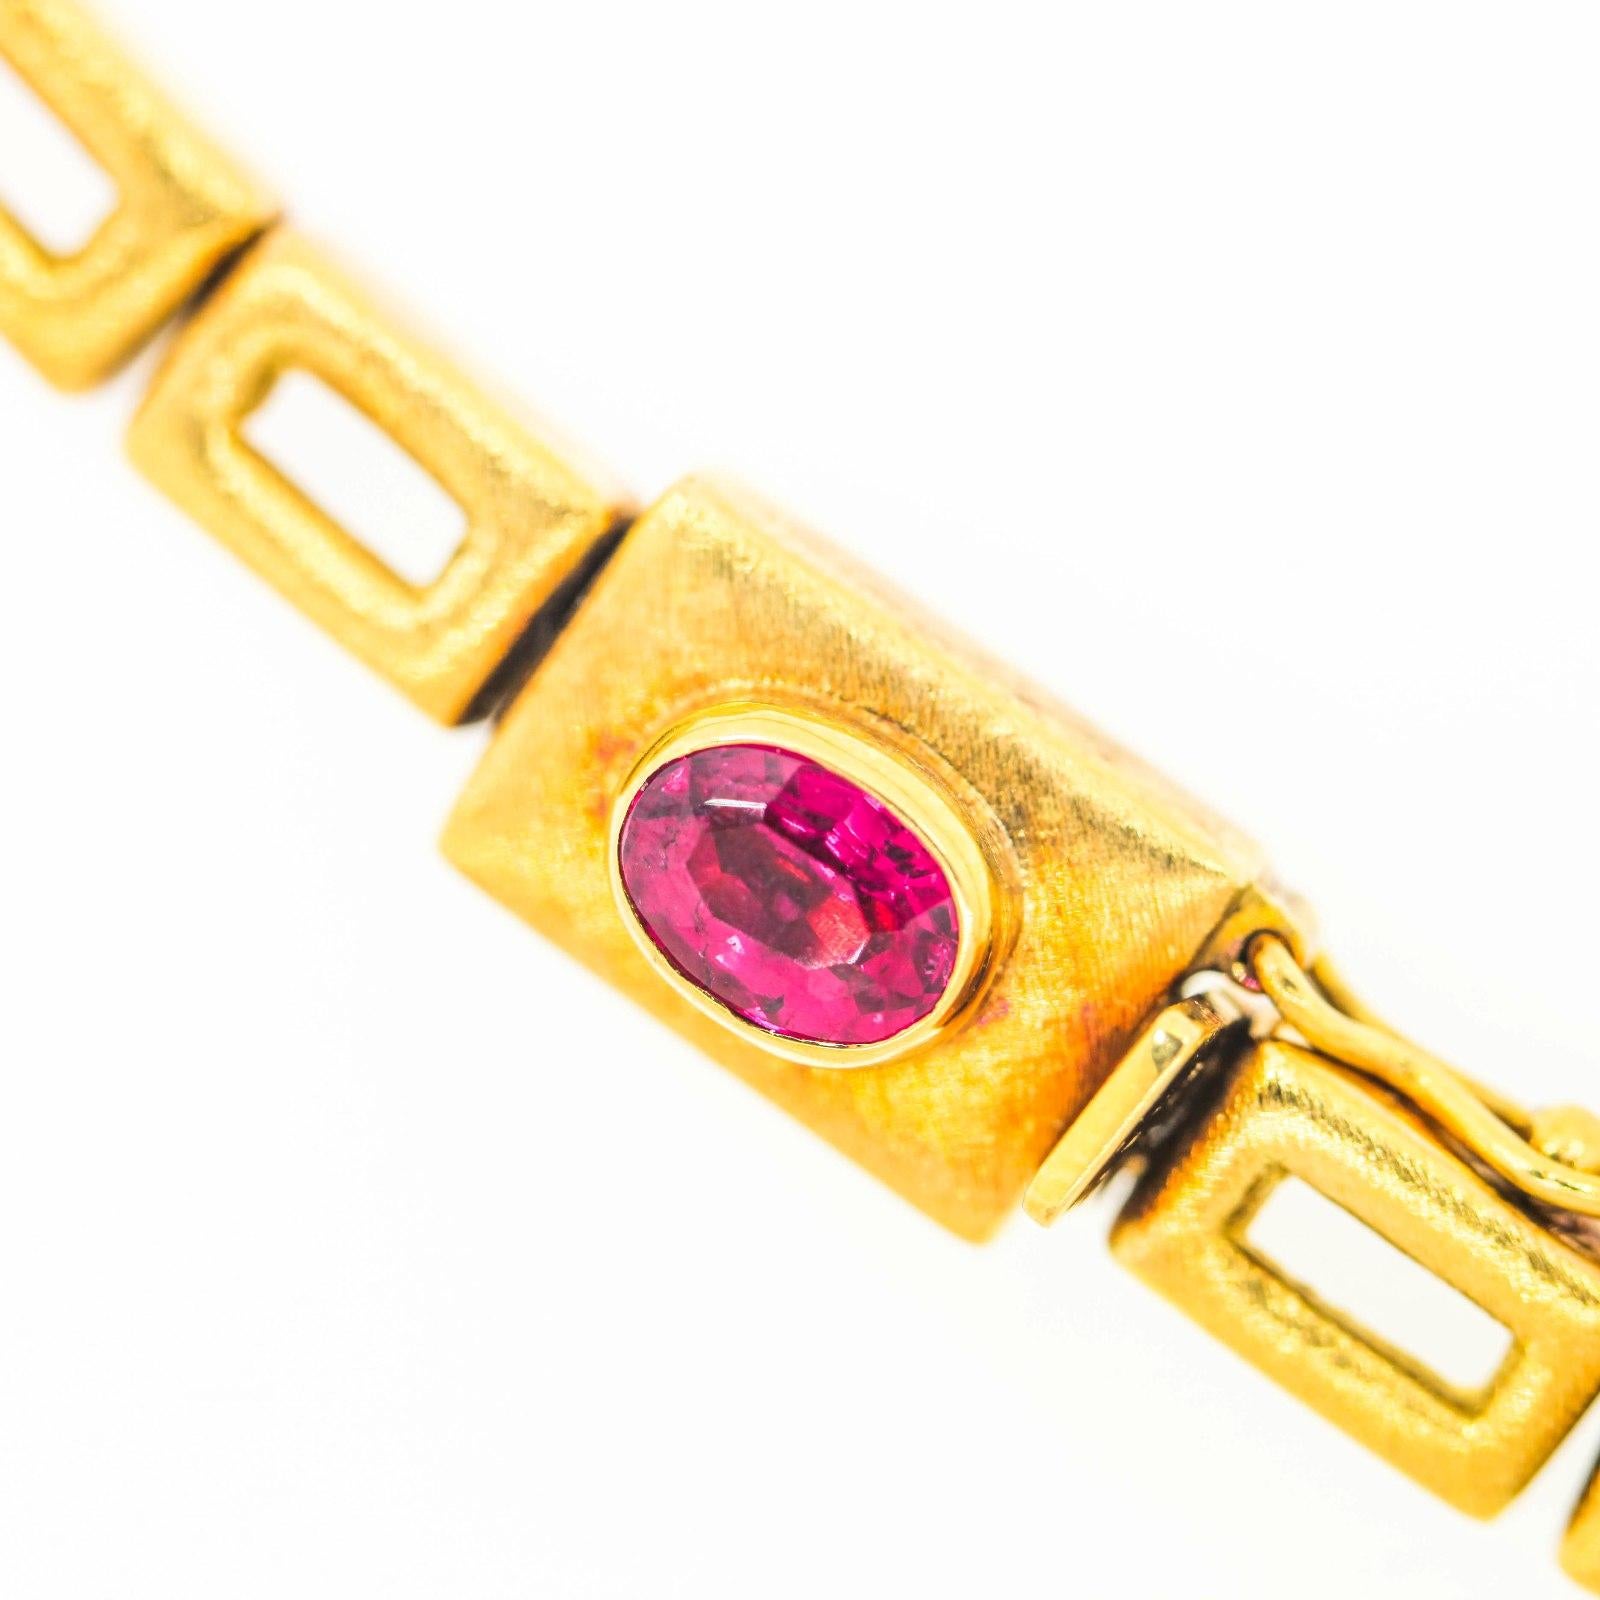 Burle Marx Rubellite Gold Necklace In Excellent Condition For Sale In Beverly Hills, CA